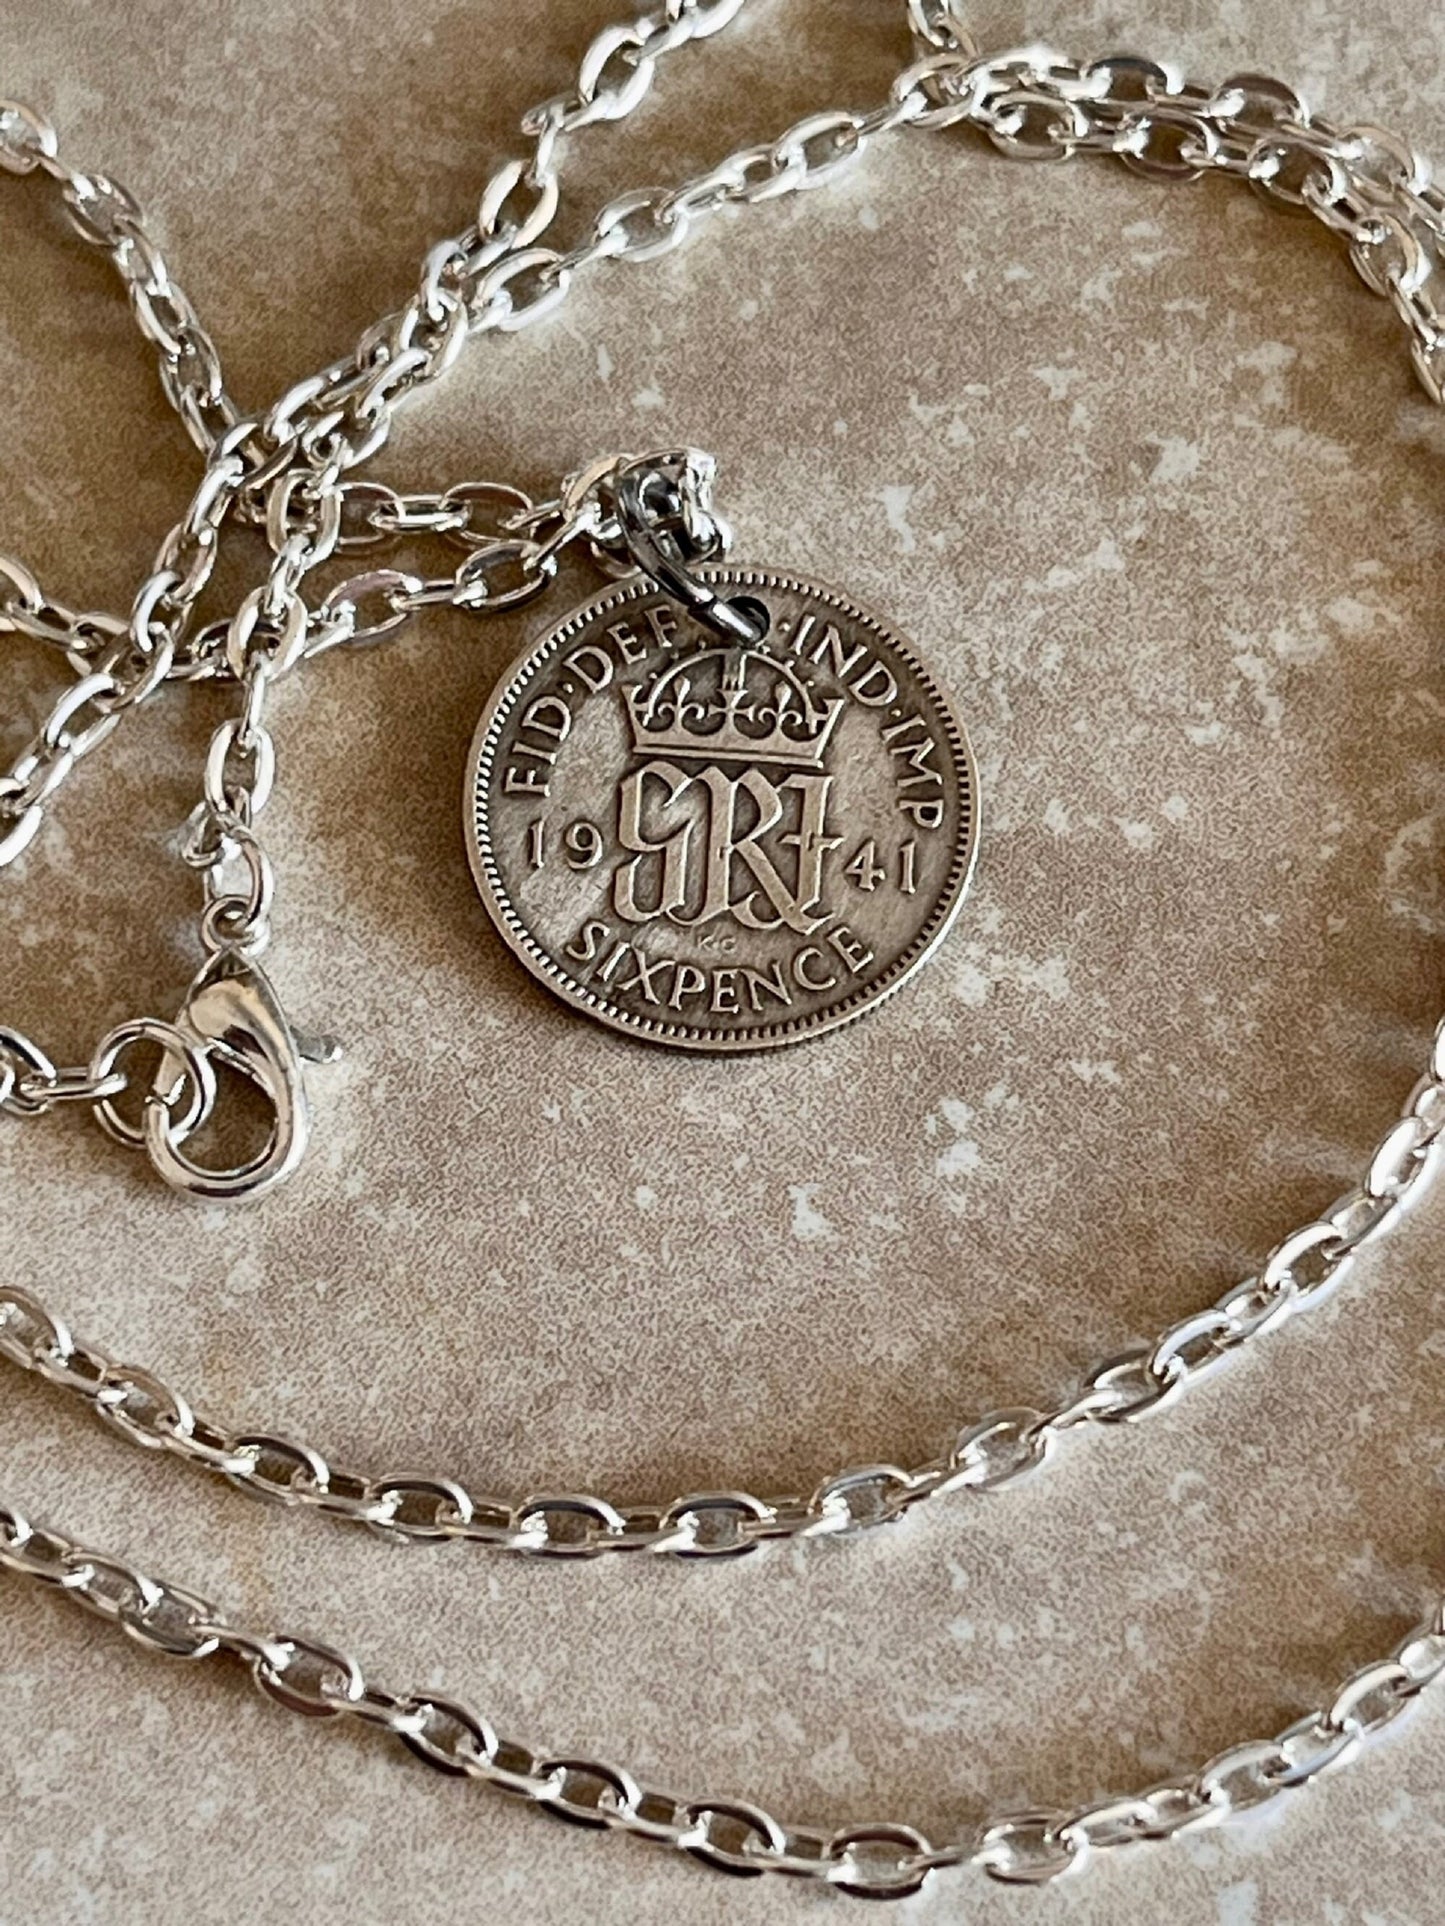 Britain Silver Pendant Coin Necklace 6 Pence Sixpence United Kingdom Personal Jewelry Gift Friend Charm For Him Her World Coin Collector